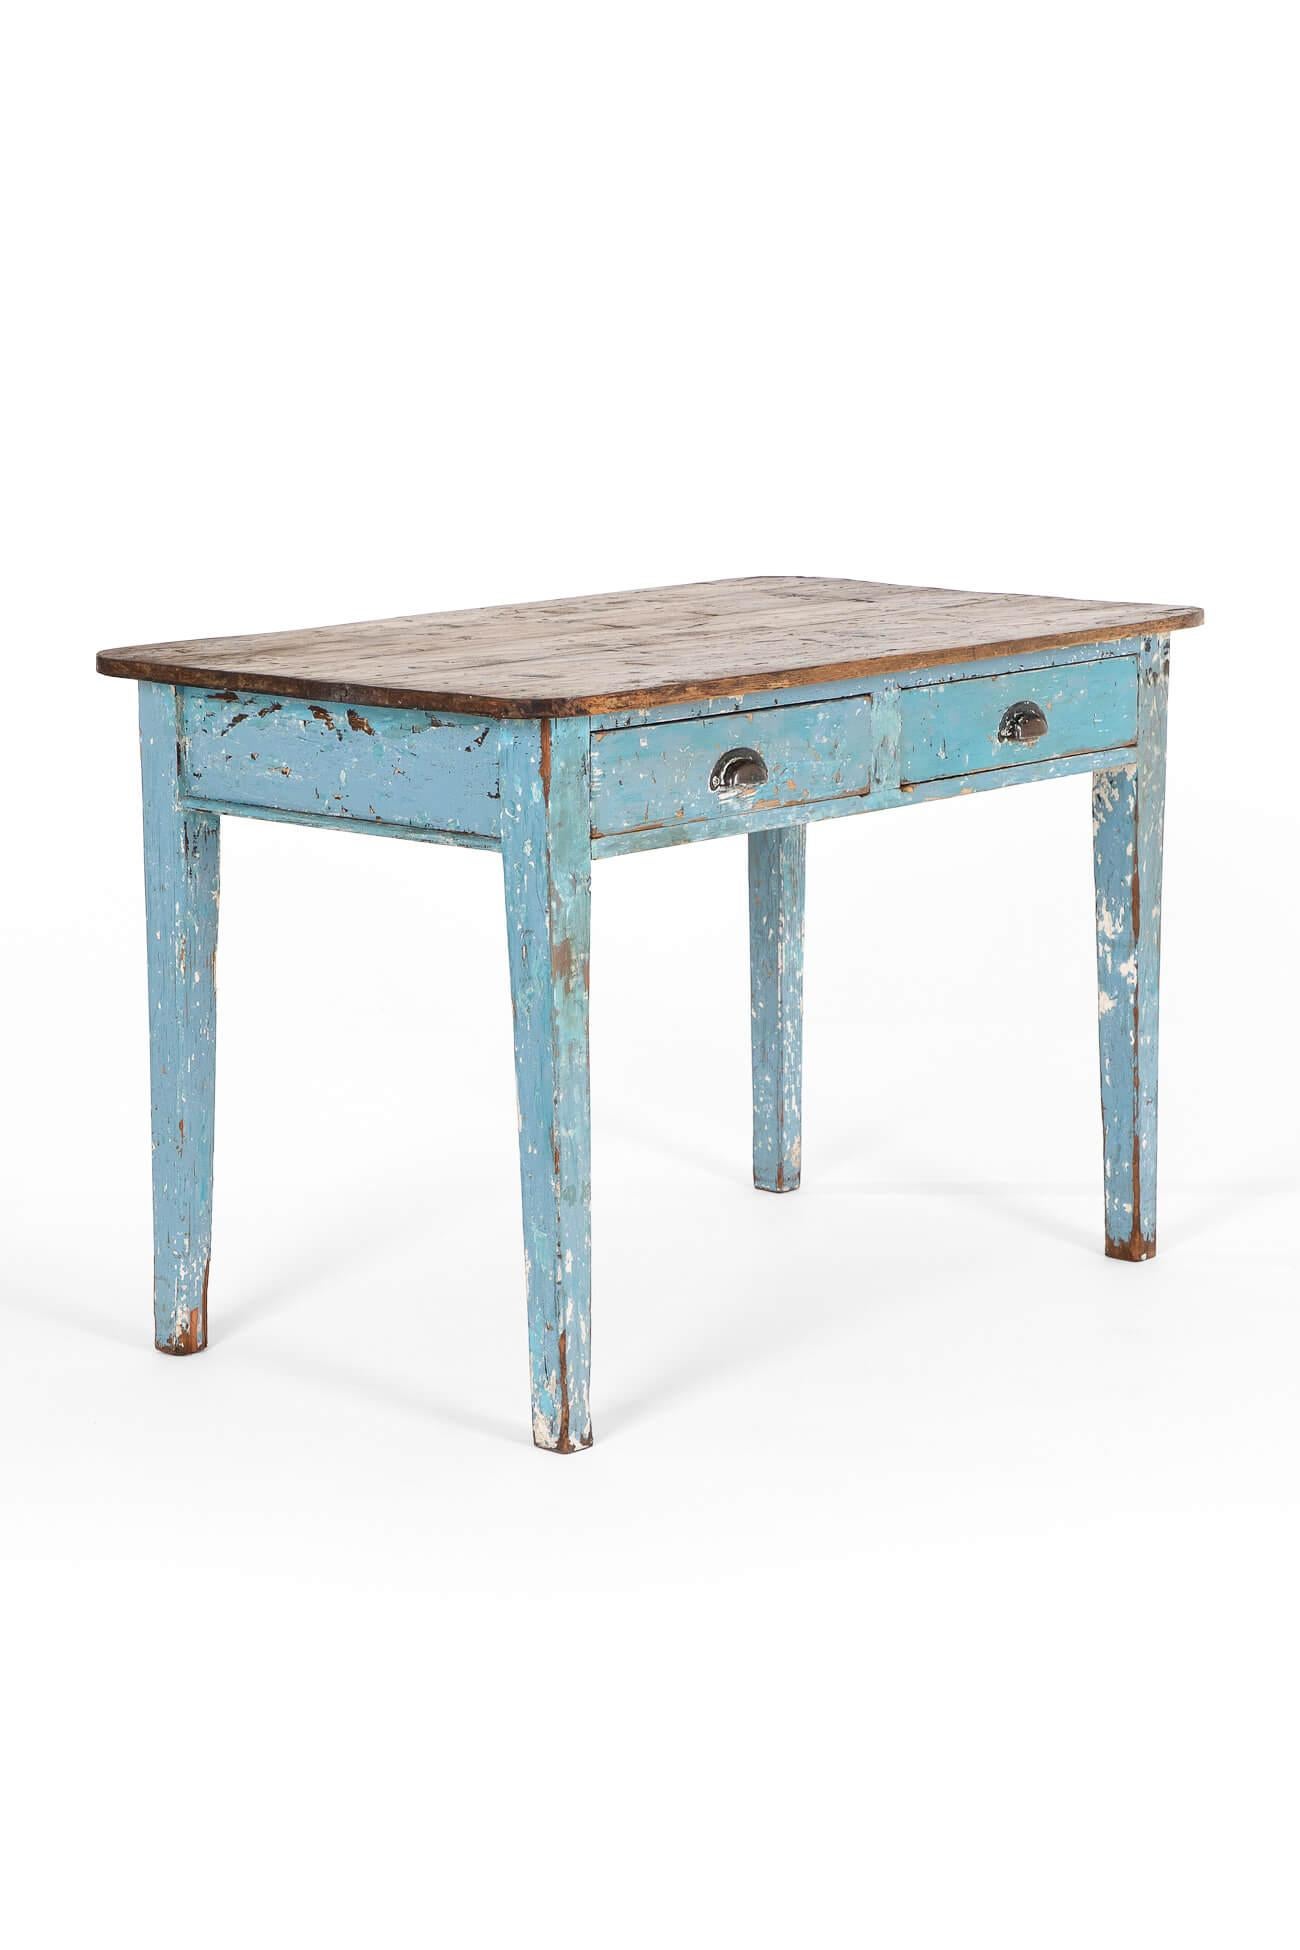 A simple pine preparation table with a painted blue base with two central drawers and original cup handles.

A generous smooth waxed pitch pine top ready for domestic use all raised on block legs.

English, circa 1900.

TOTAL

W: 115 CM W: 45.2